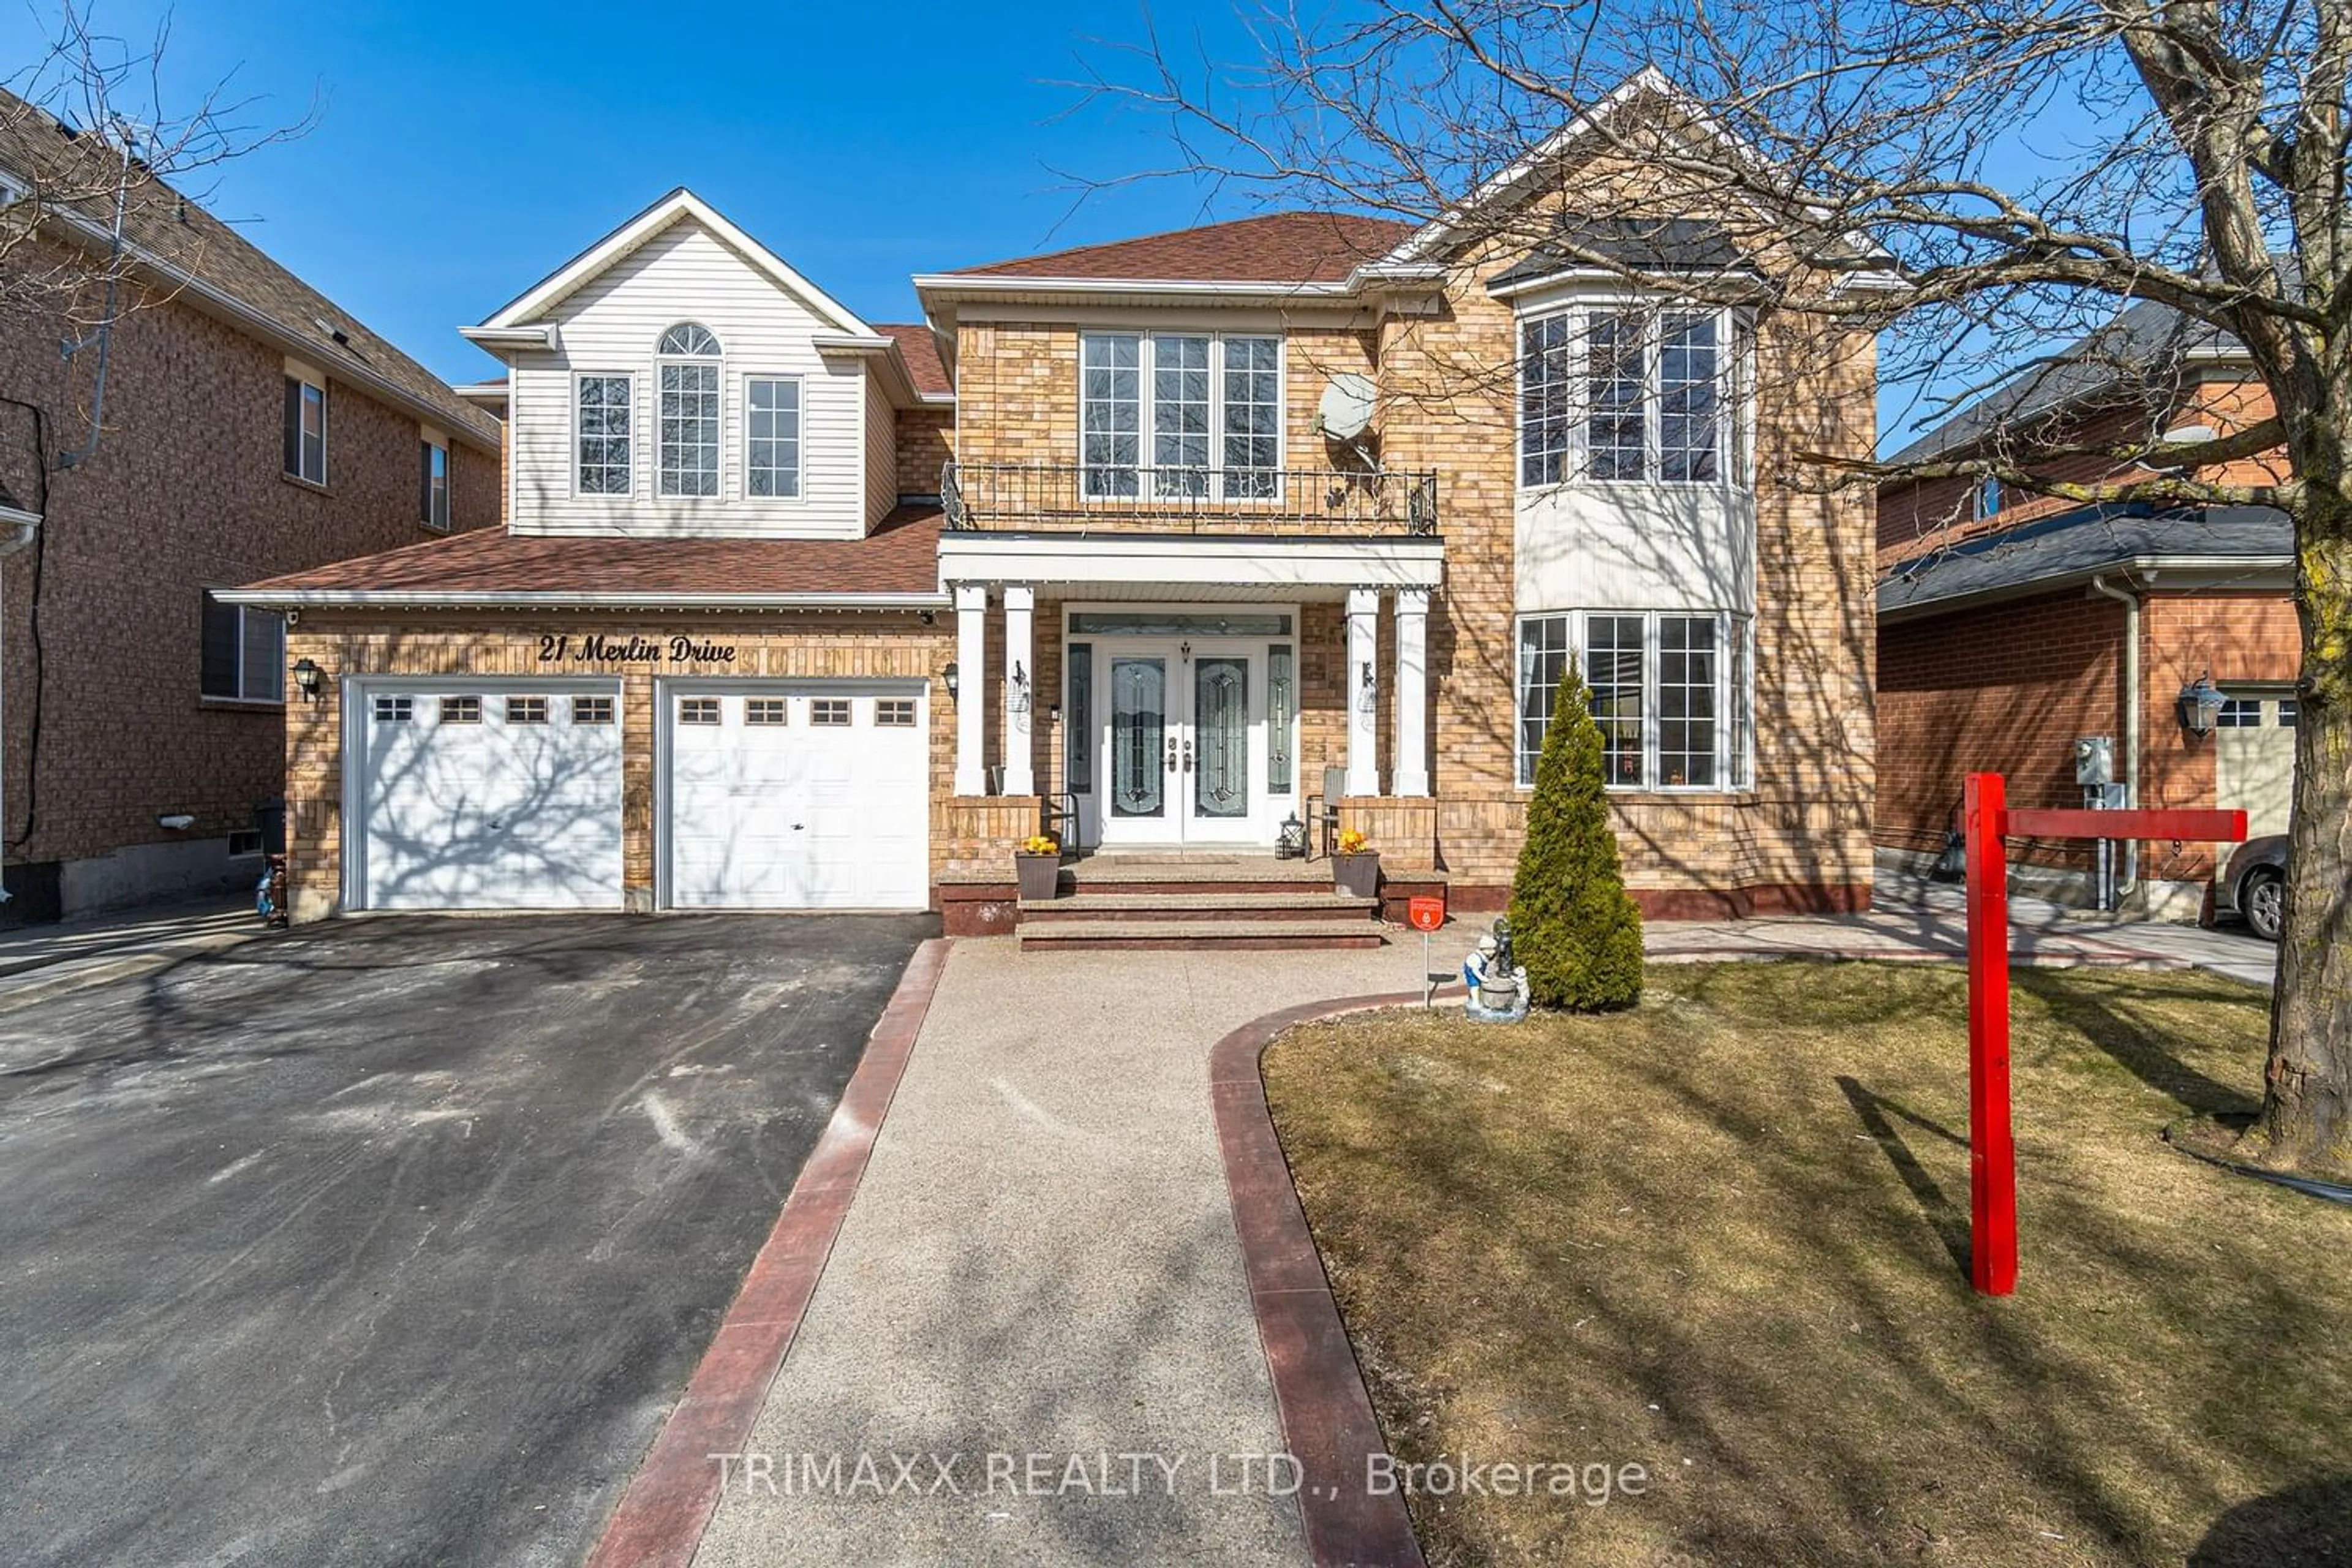 Home with brick exterior material for 21 Merlin Dr, Brampton Ontario L6P 1E9